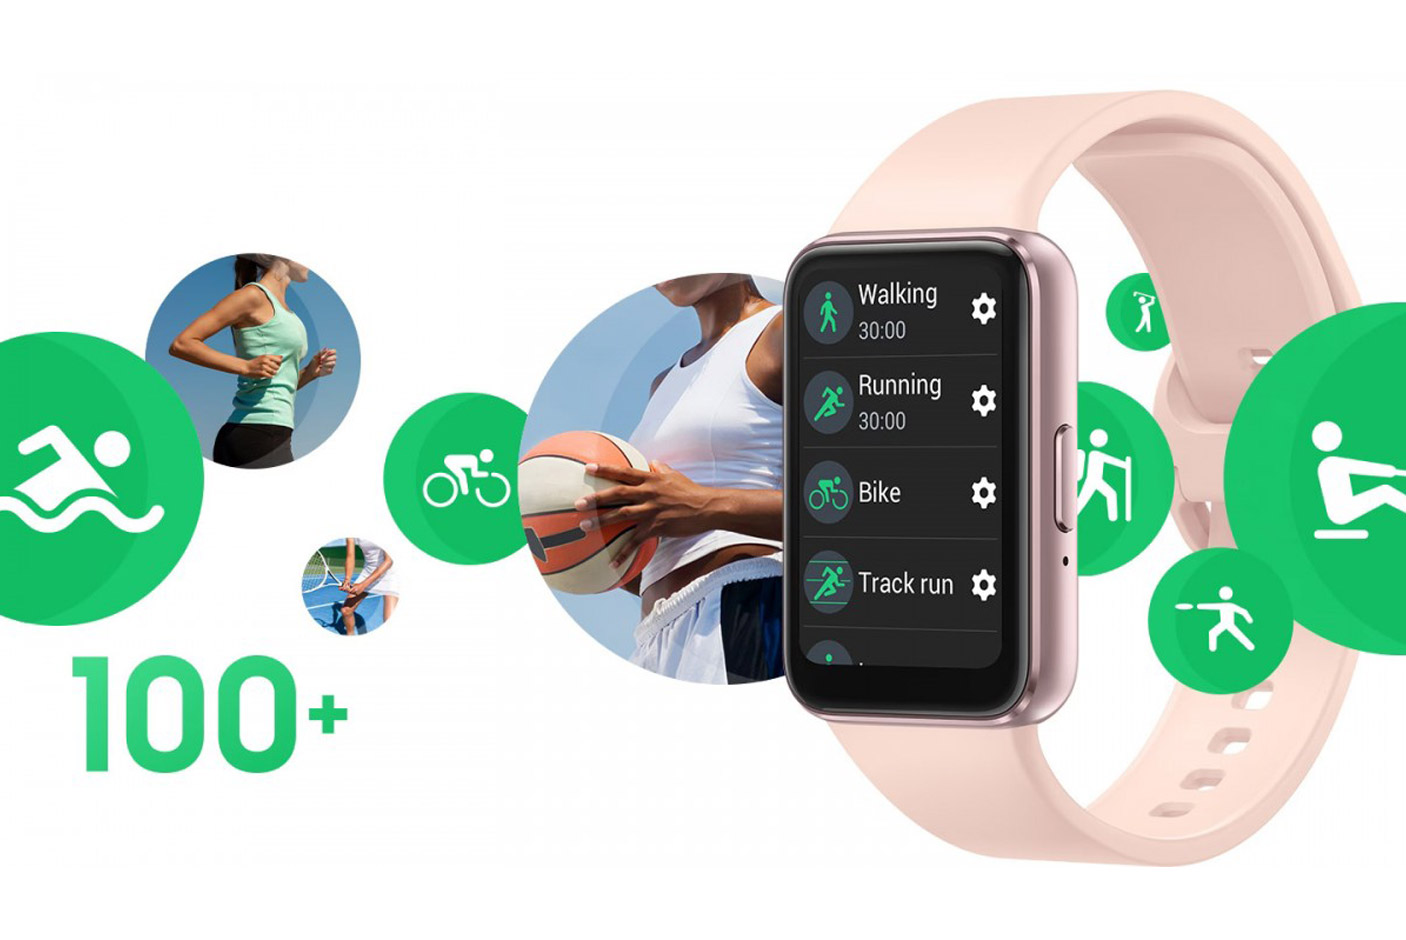 During the day, the Galaxy Fit3 allows users to keep an eye on their daily activities. Users can track over 100 types of workouts anytime, anywhere and review their exercise records easily, encouraging them to stay motivated to achieve their goals.